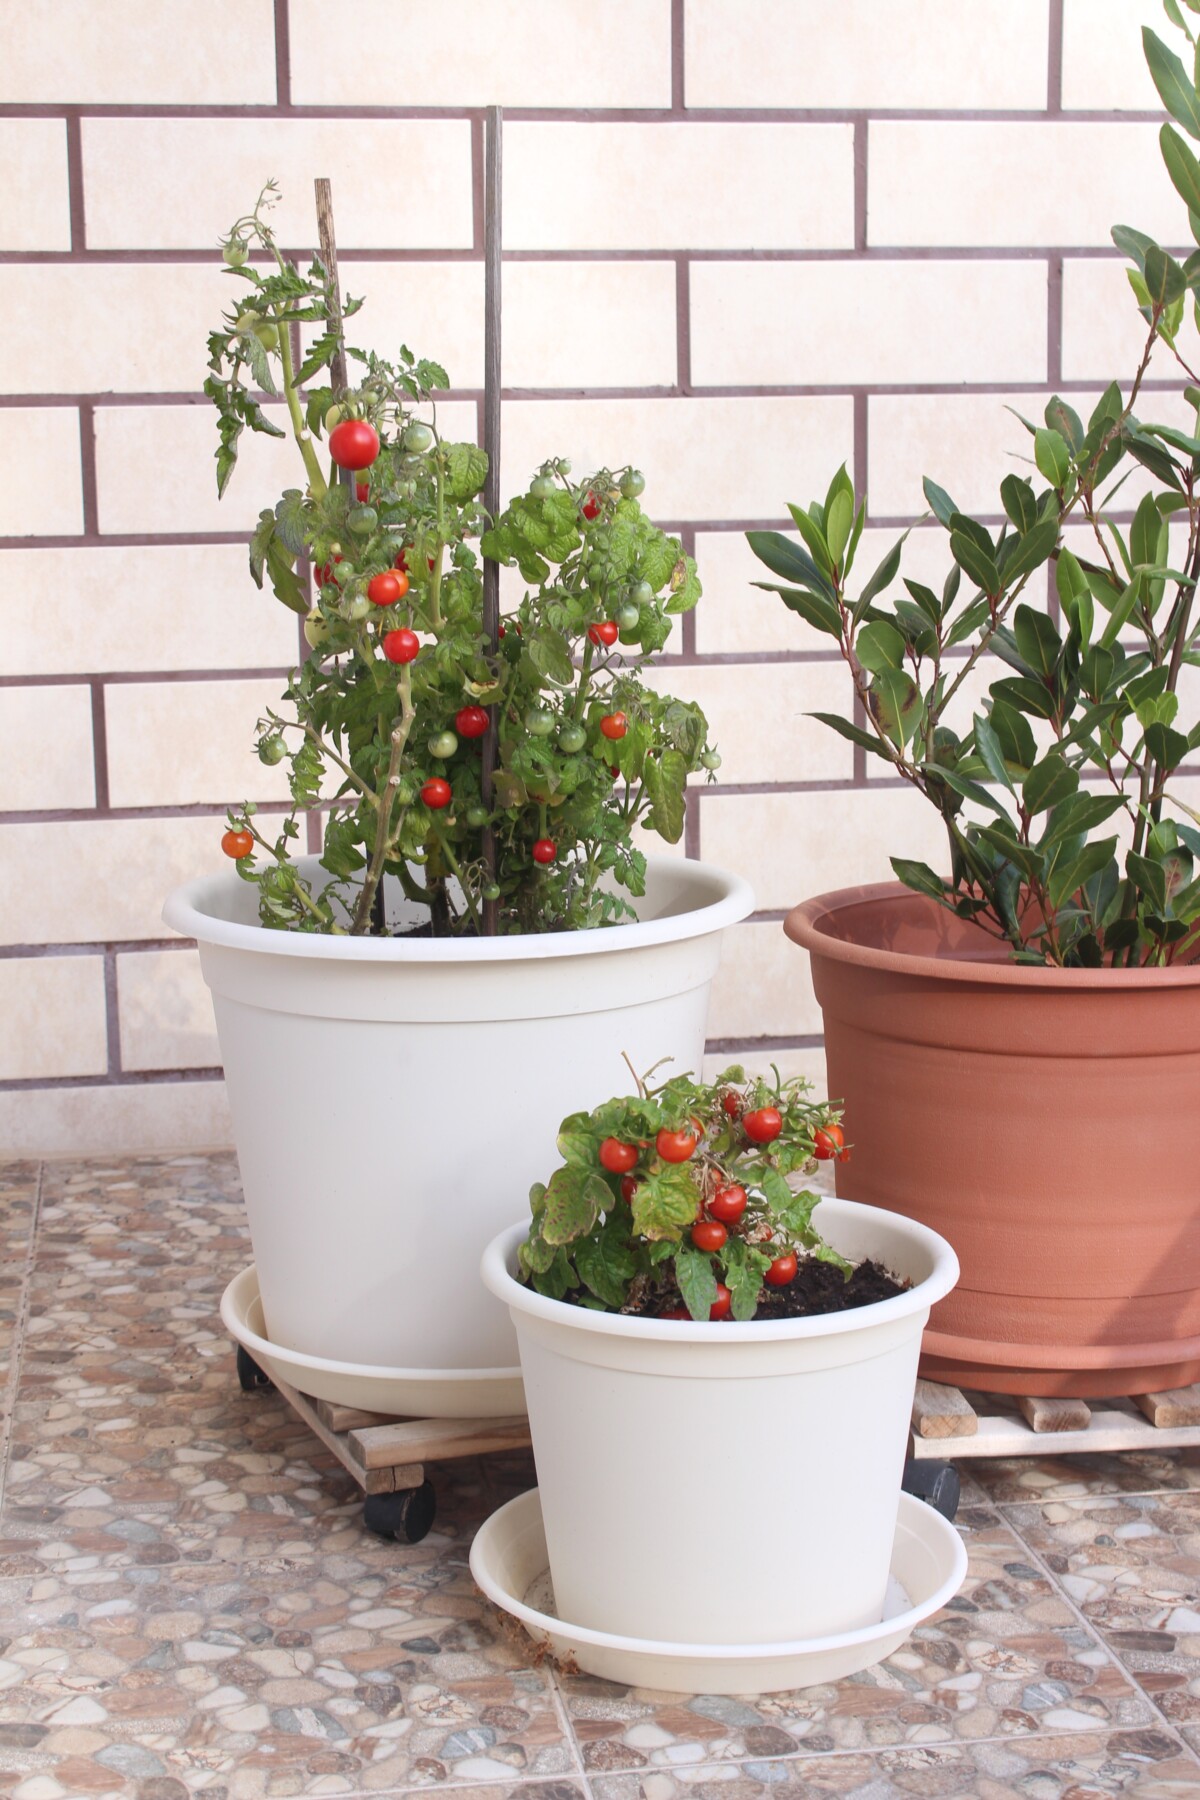 Potted tomatoes on a balcony